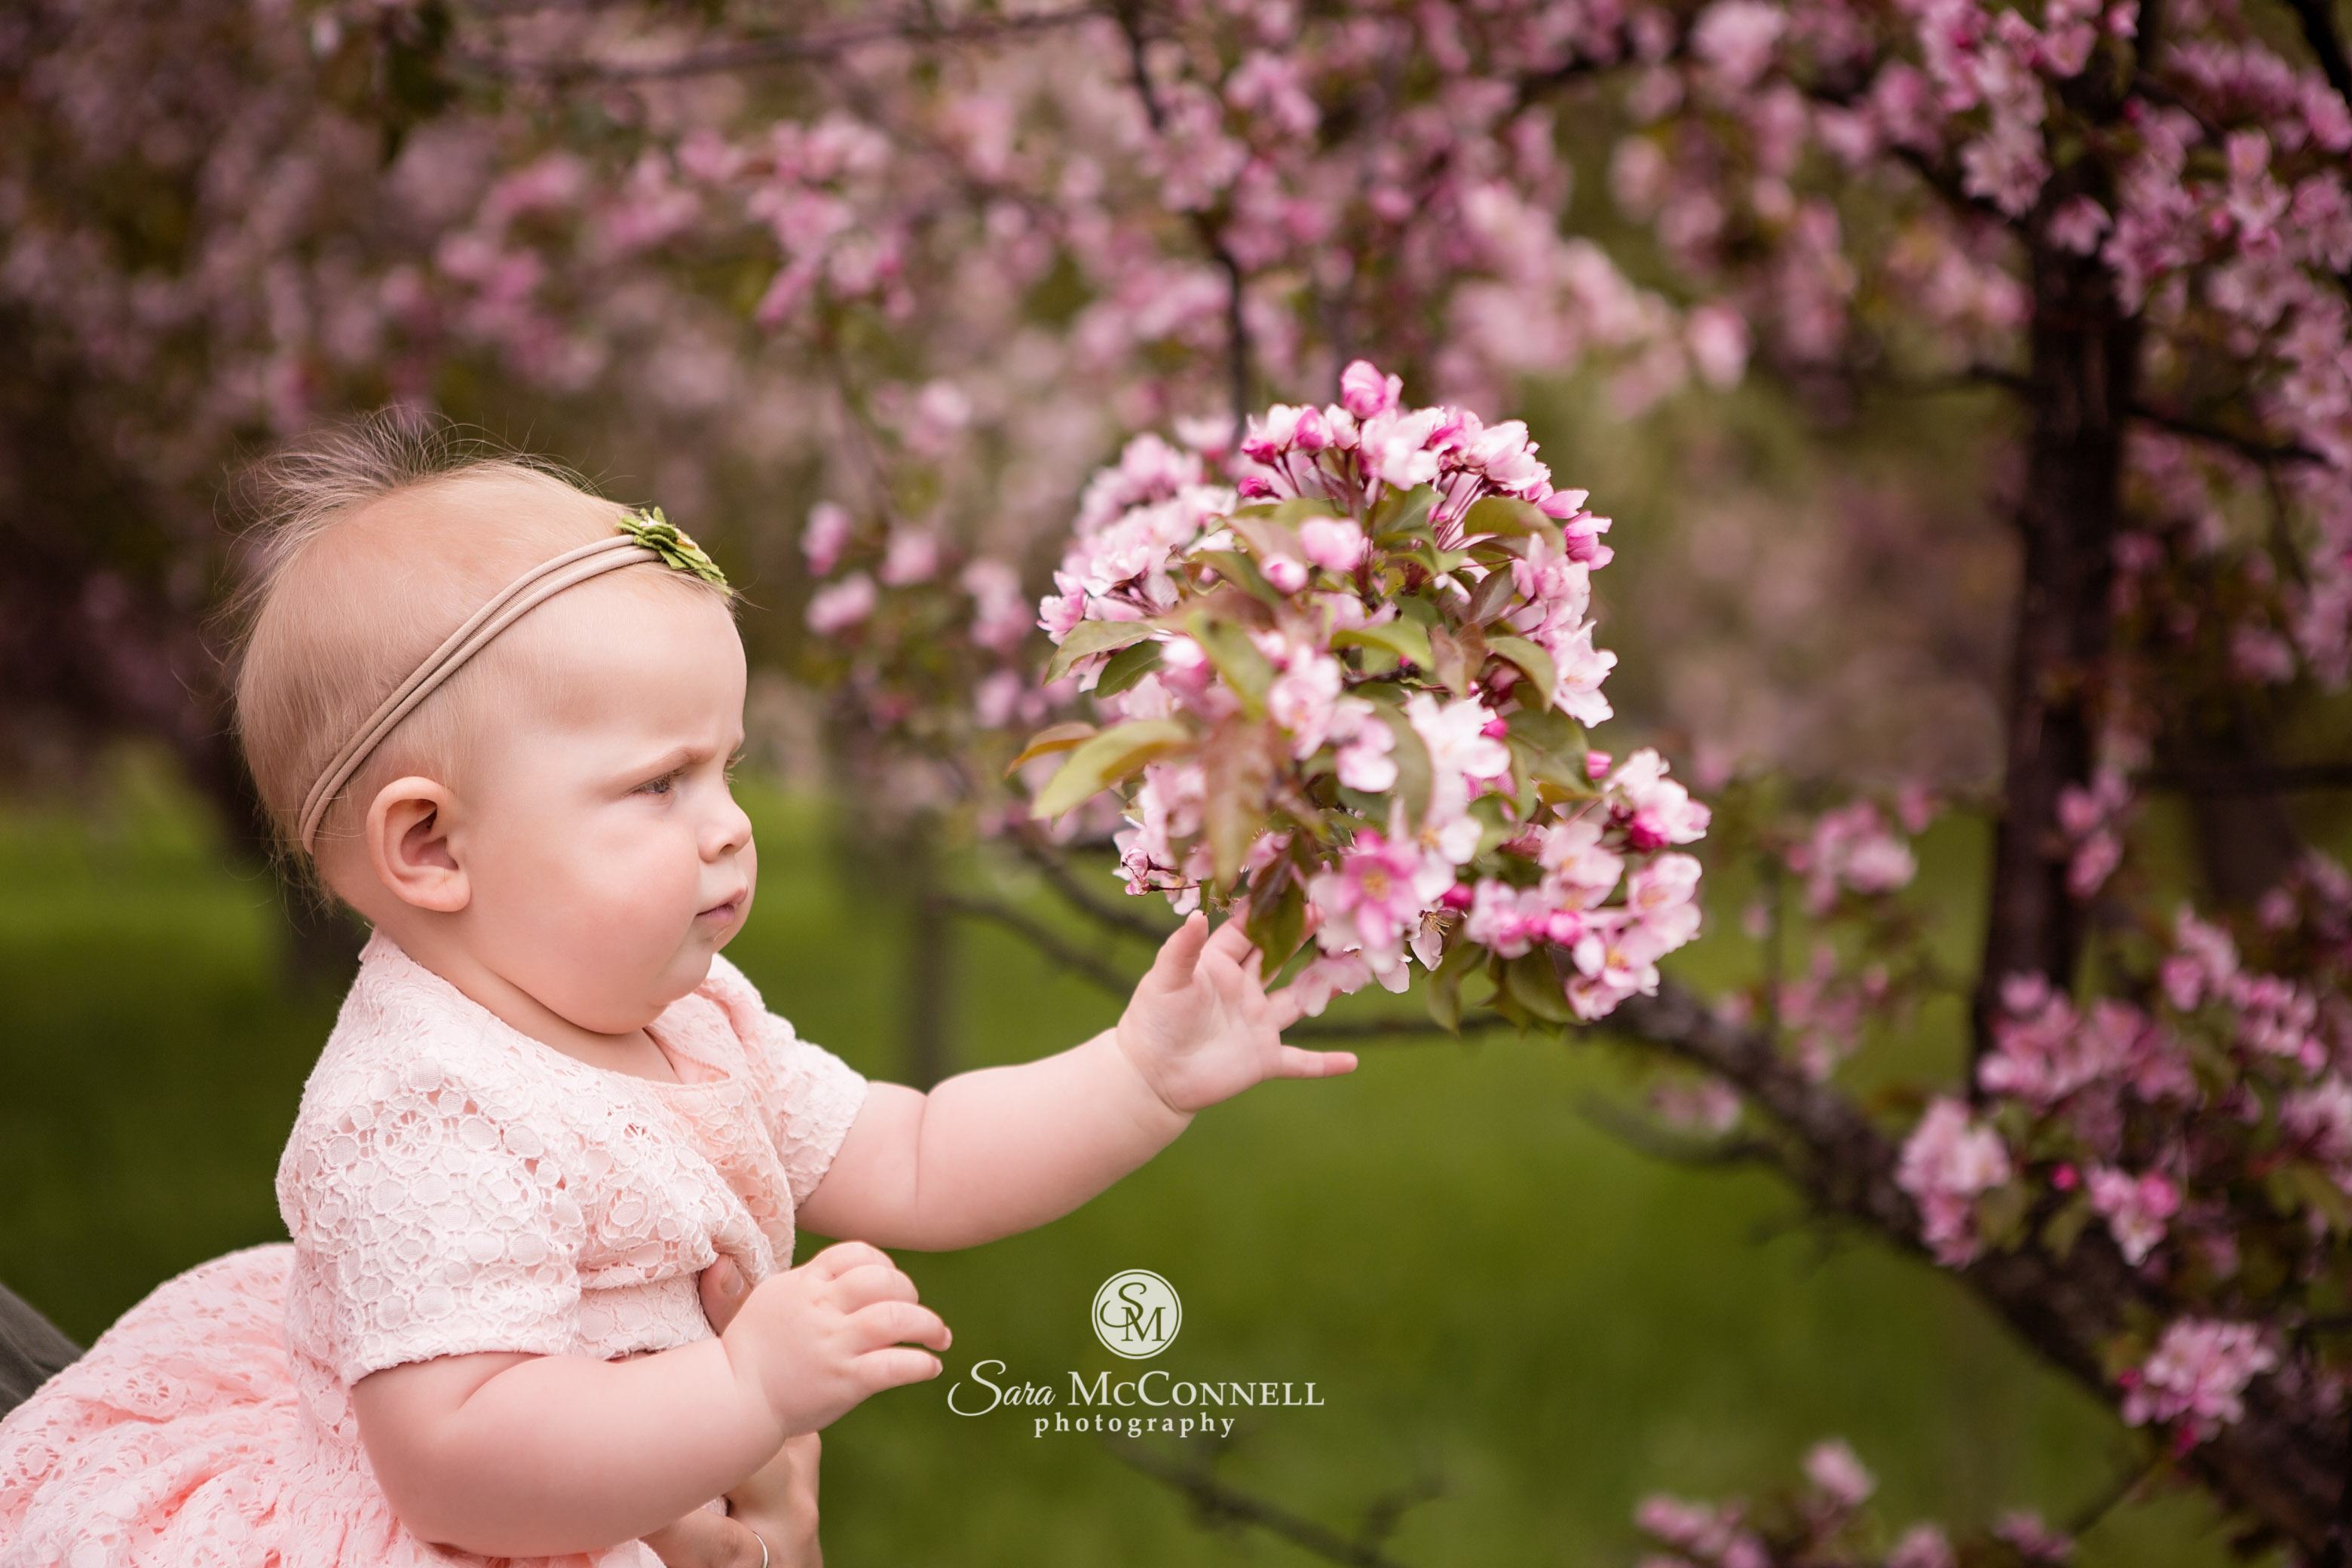 Spring Photos in Ottawa: Blossom Sessions